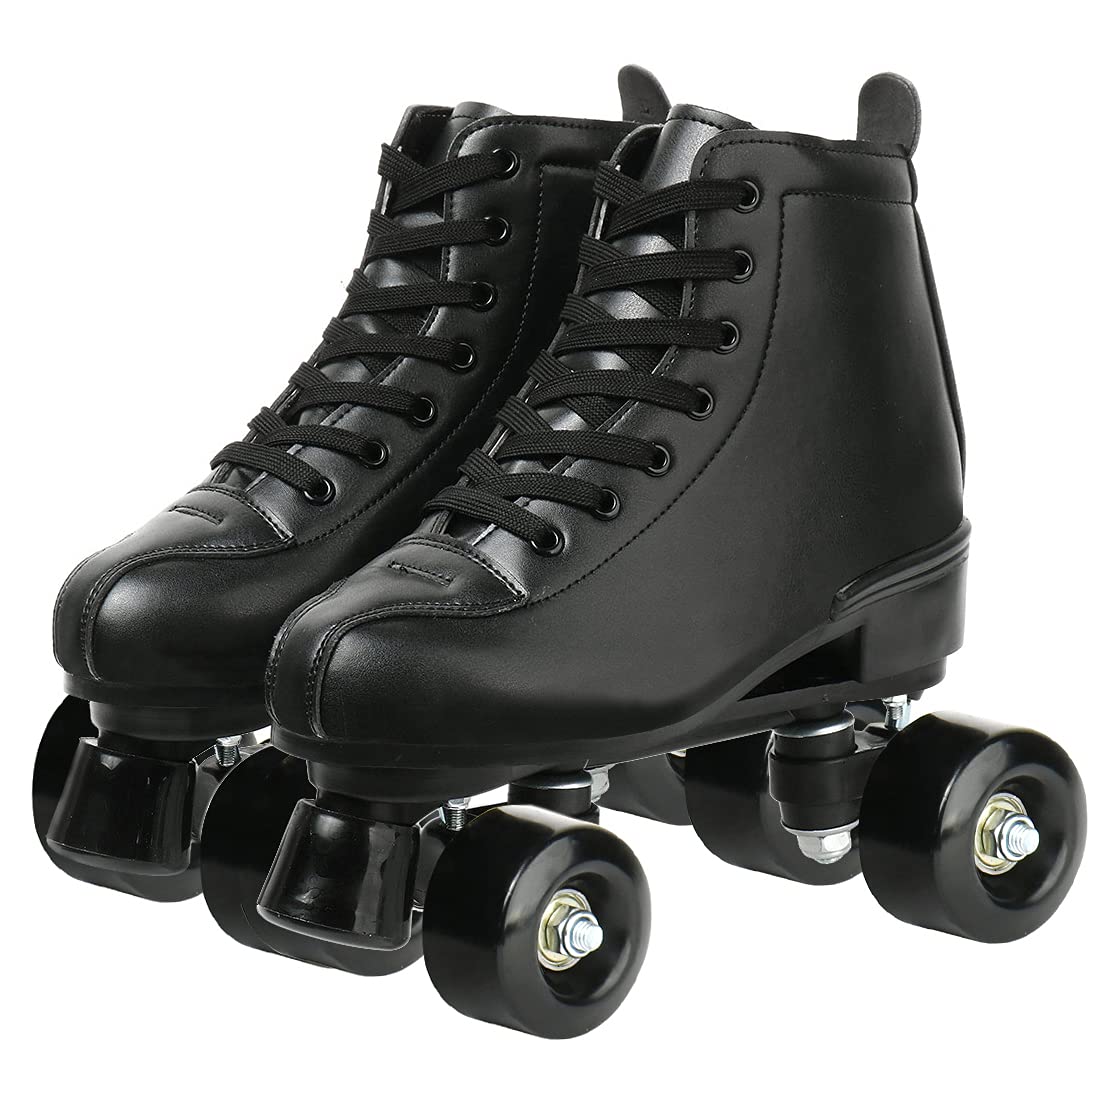 XUDREZ Classic Roller Skates High-Top Double-Row Leather Roller